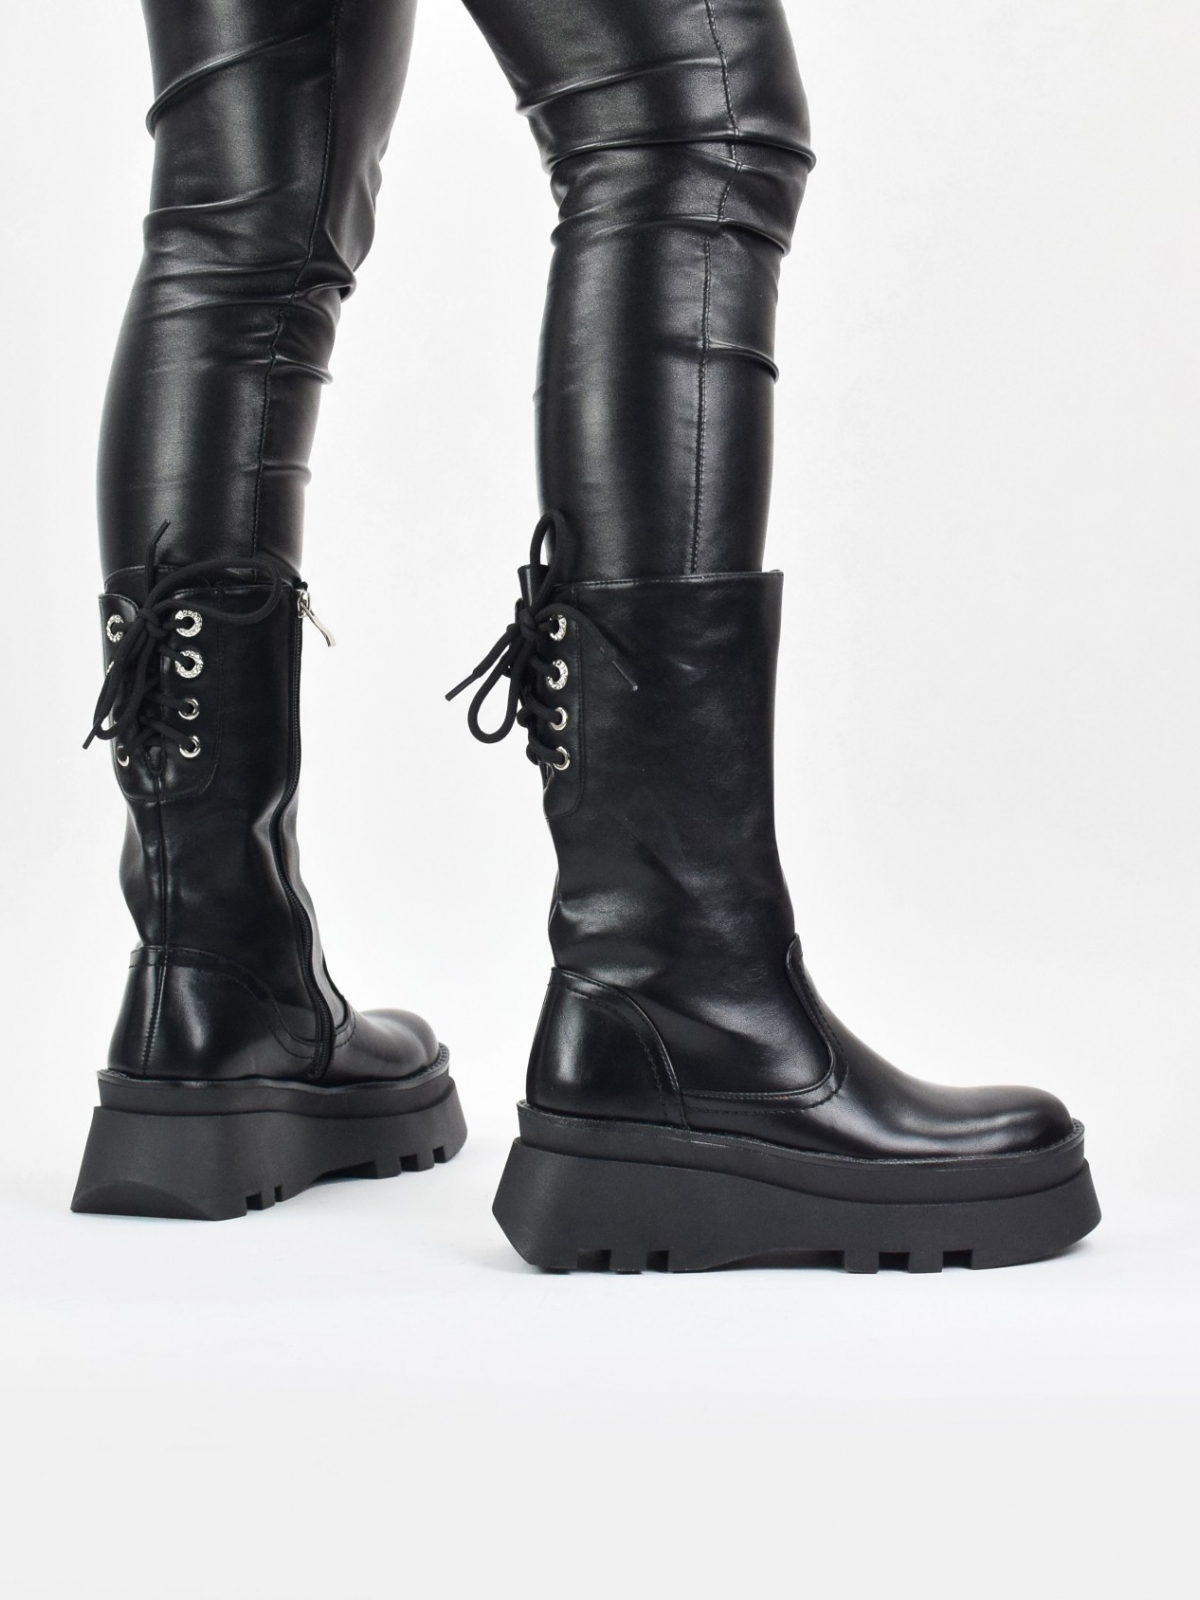 Platform mid calf boots with back lace up detail in black